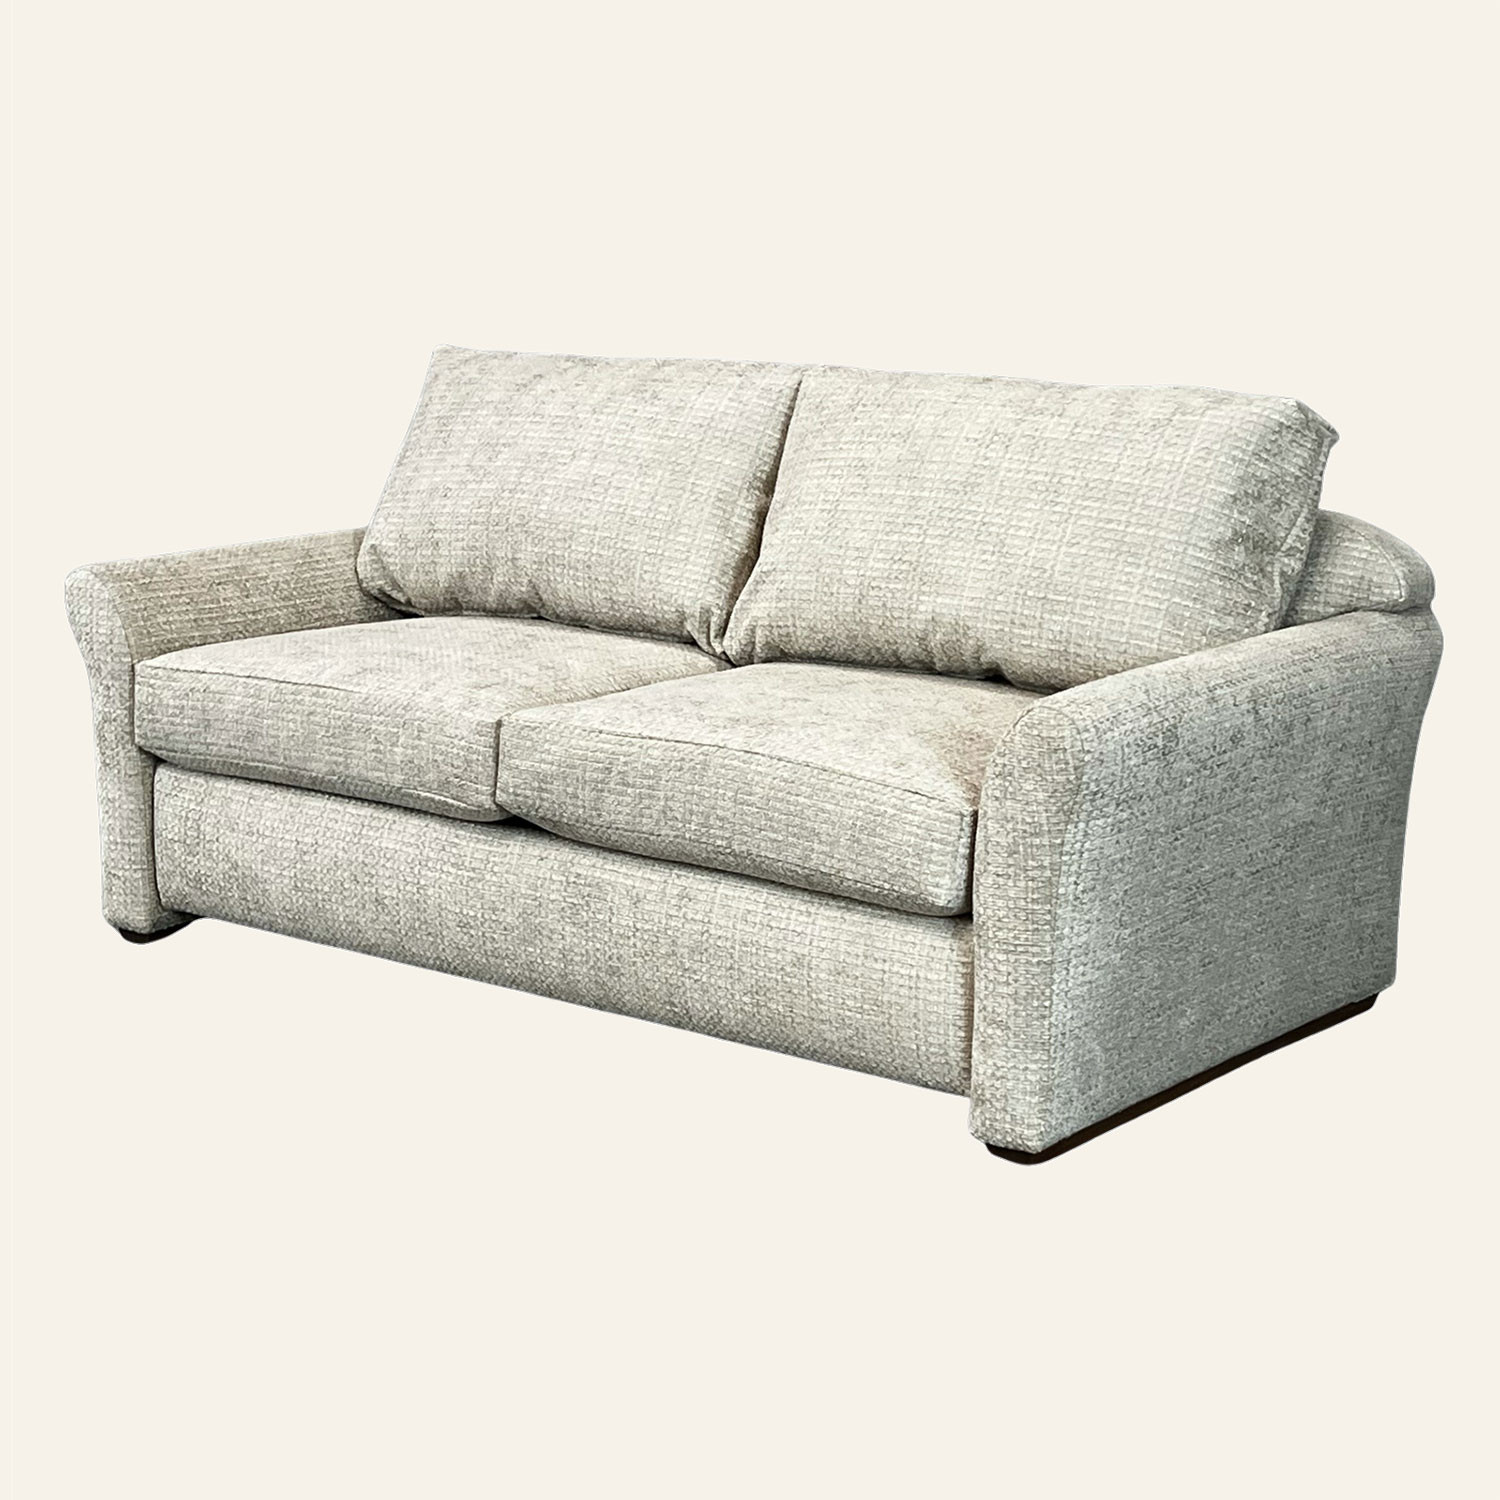 Coventry Living Room Seating 255330